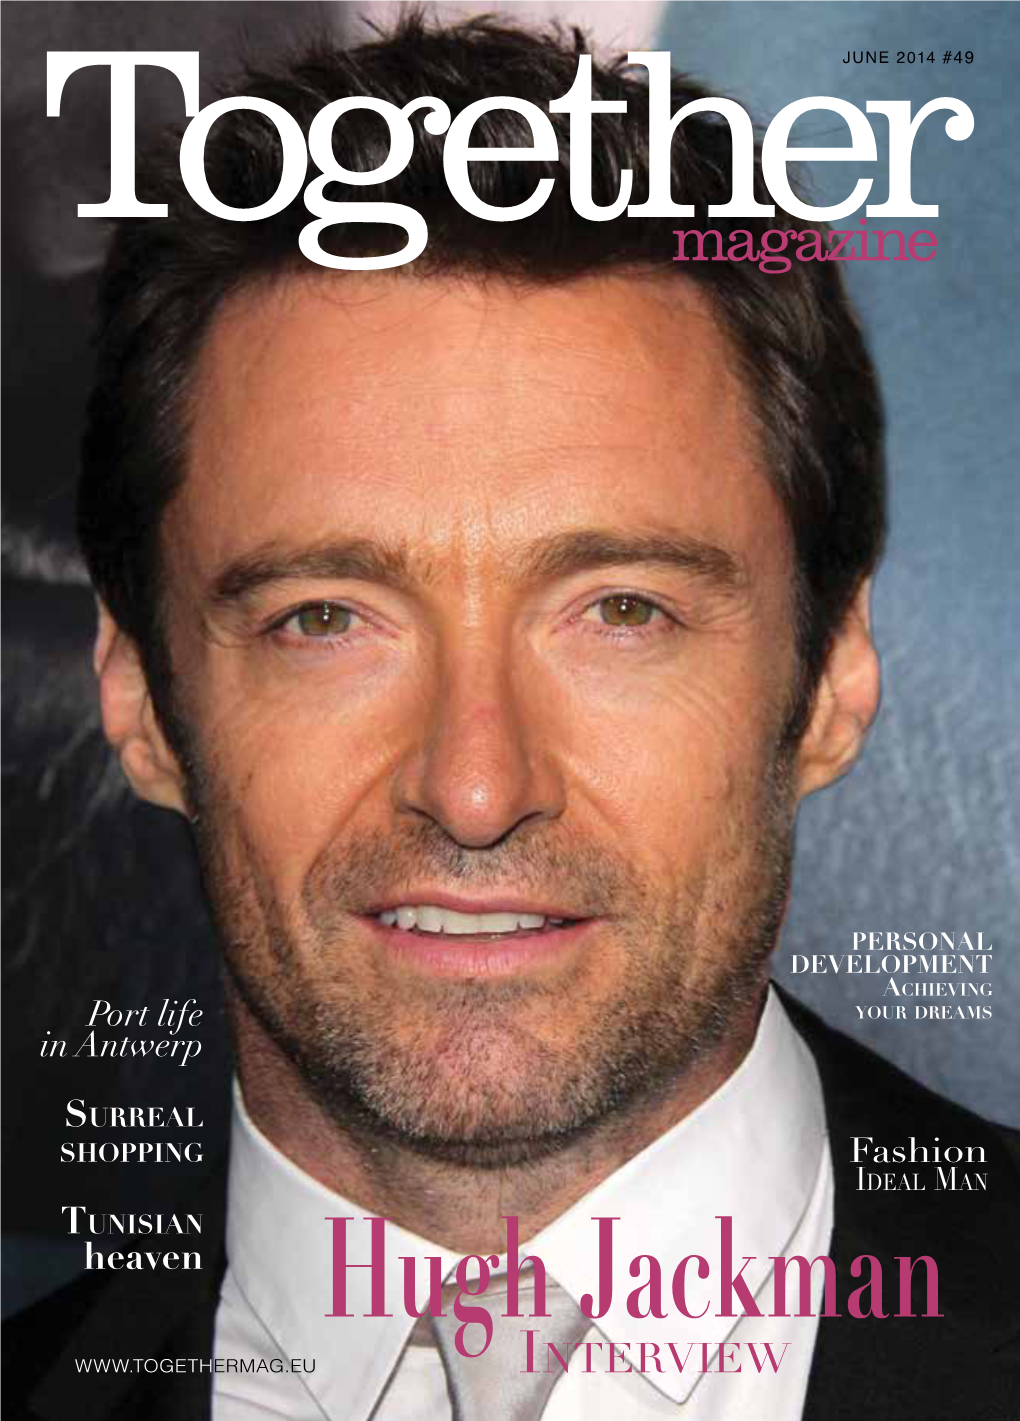 Hugh Jackman Interview “ Private Banking Must Be Mobile, Like Me.”